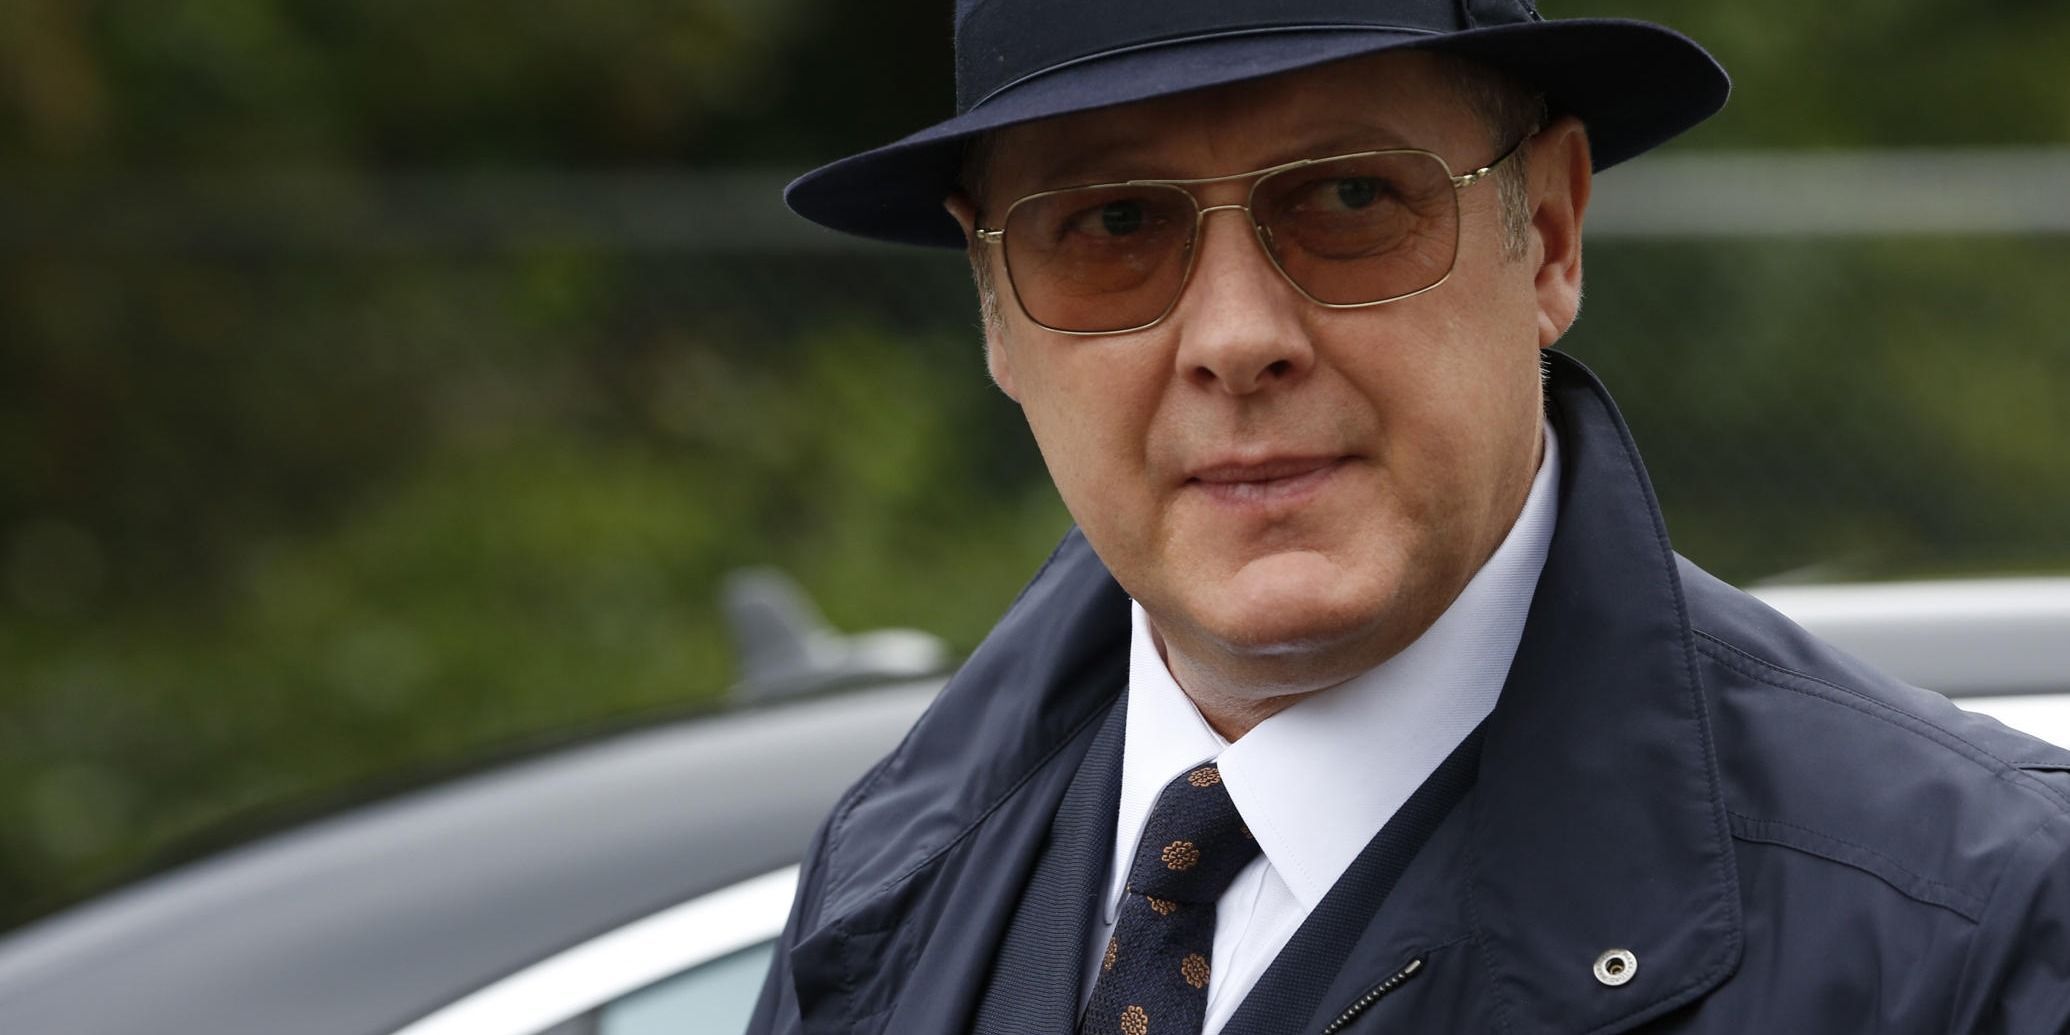 Raymond Reddington (James Spader) in The Blacklist wearing a top hat and sunglasses